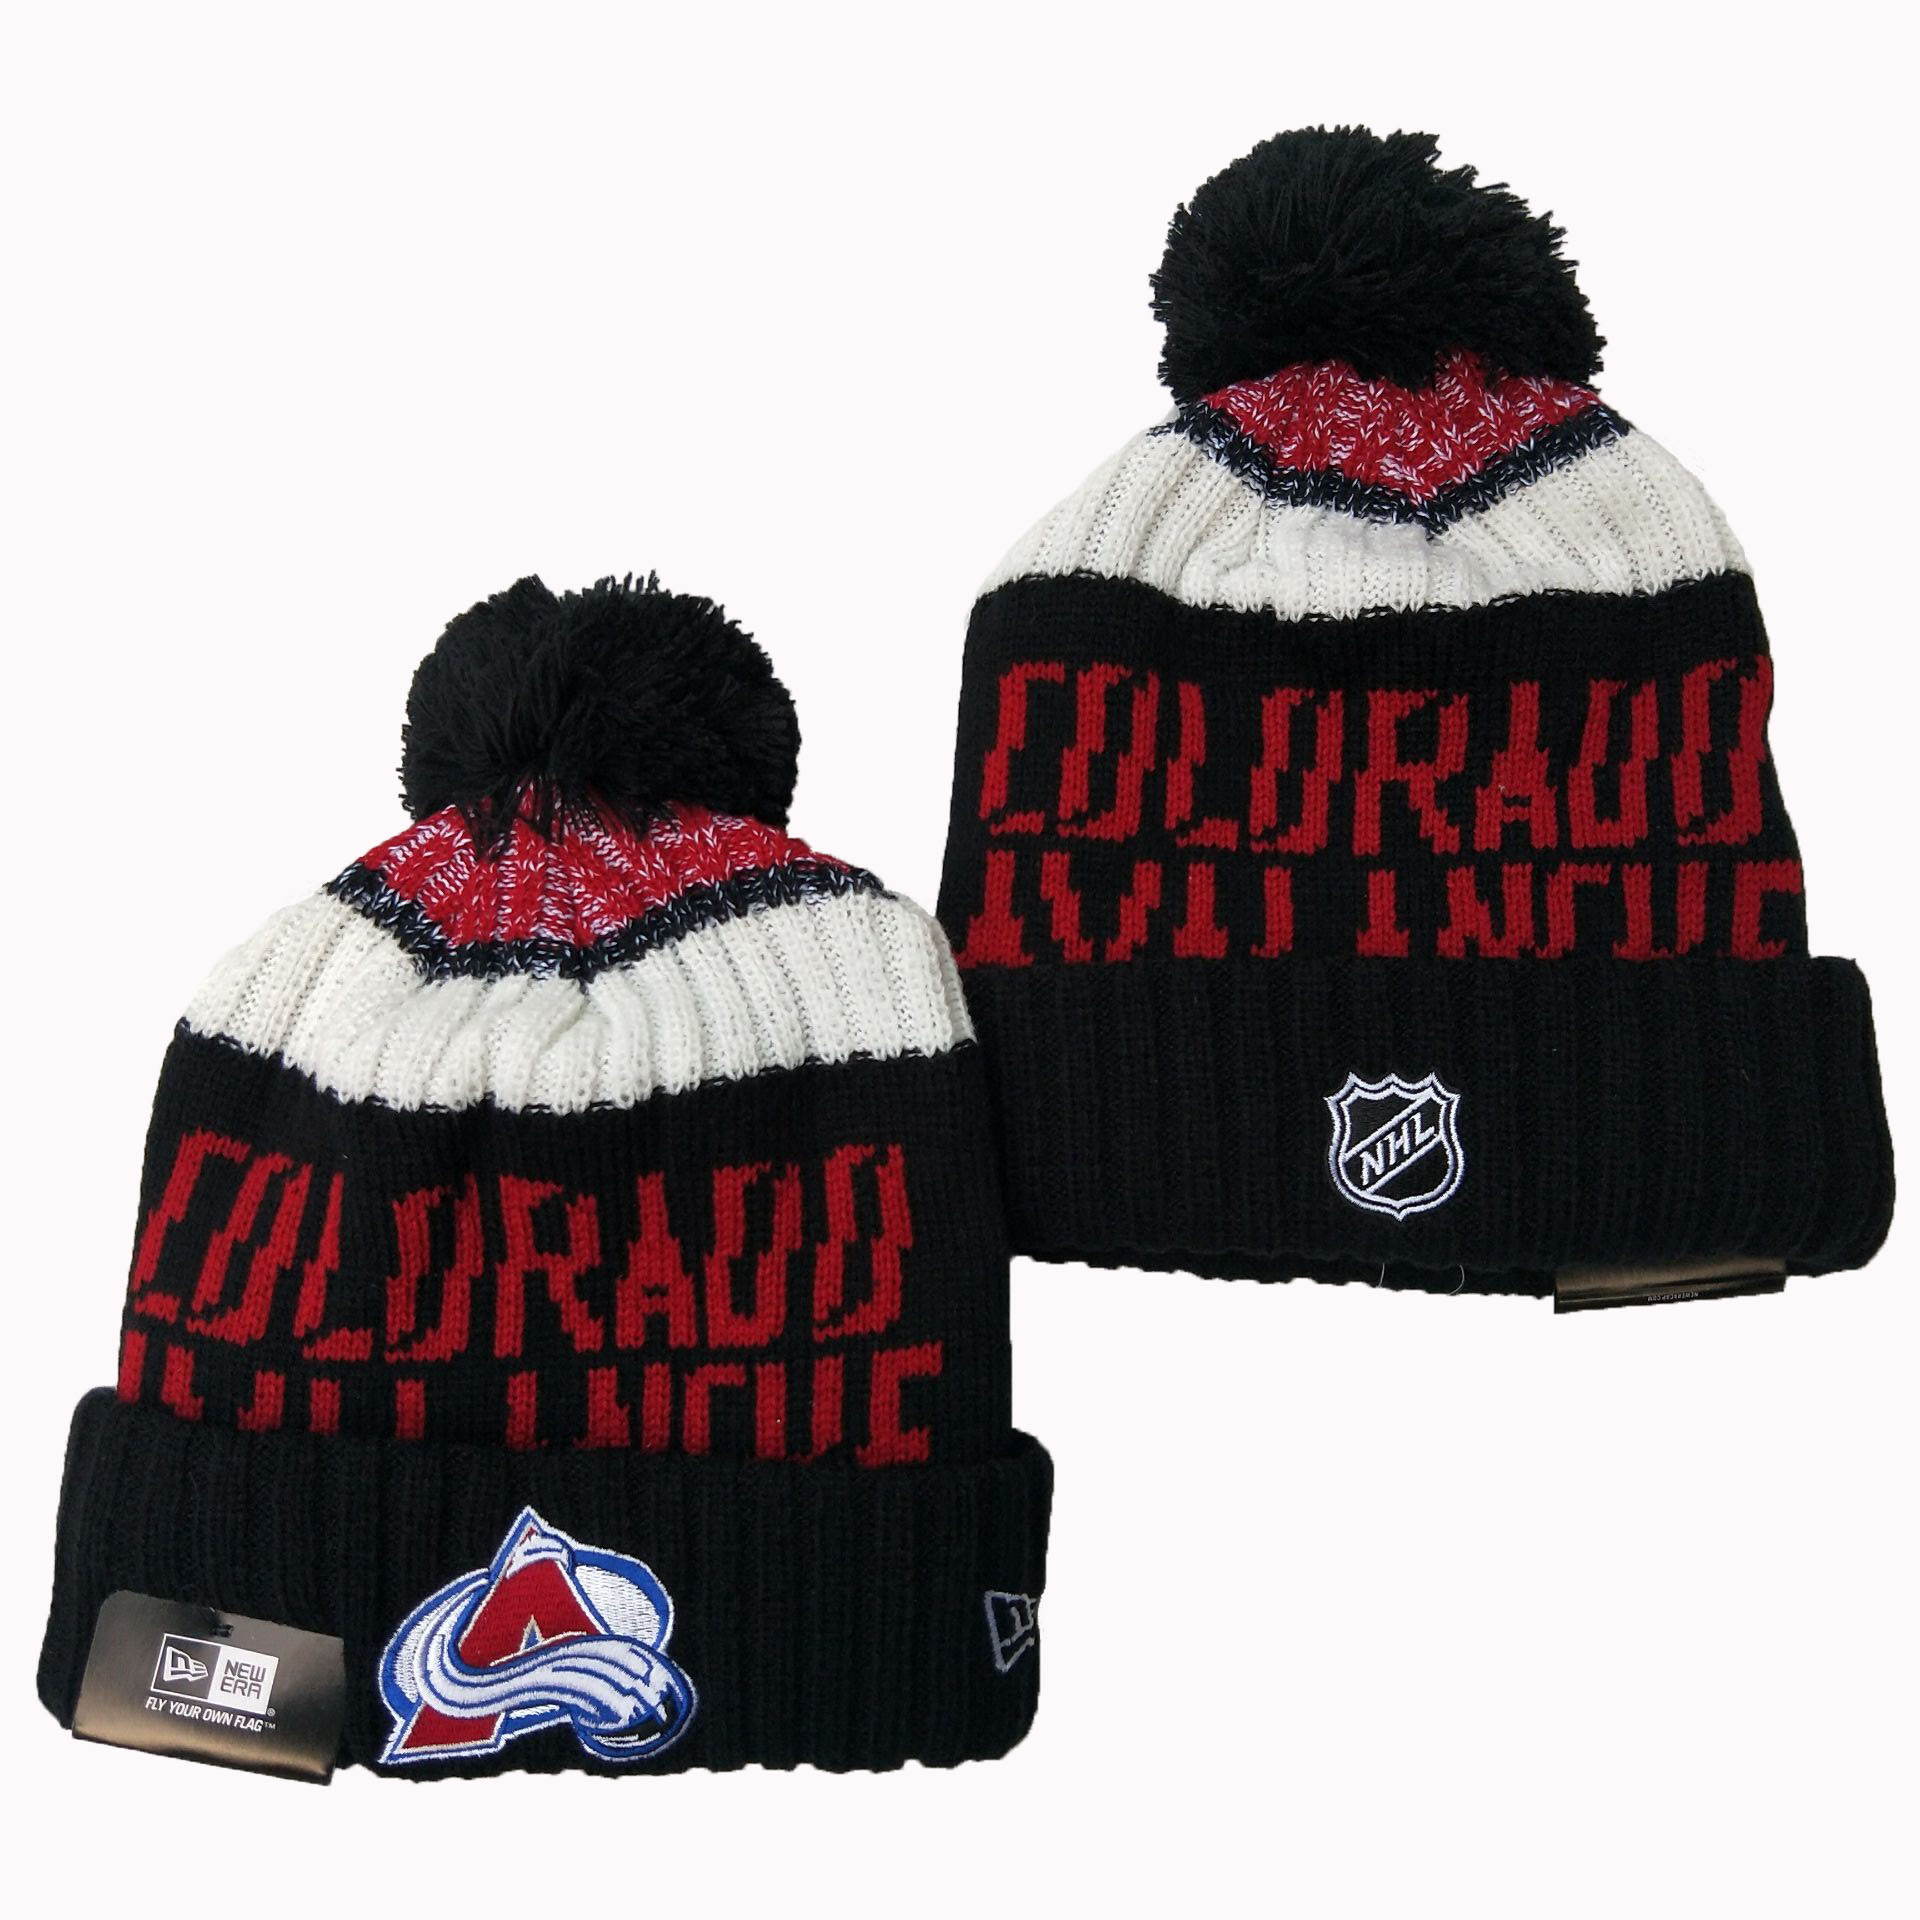 NHL Colorado Avalanche Beanies Knit Hats-YD1617